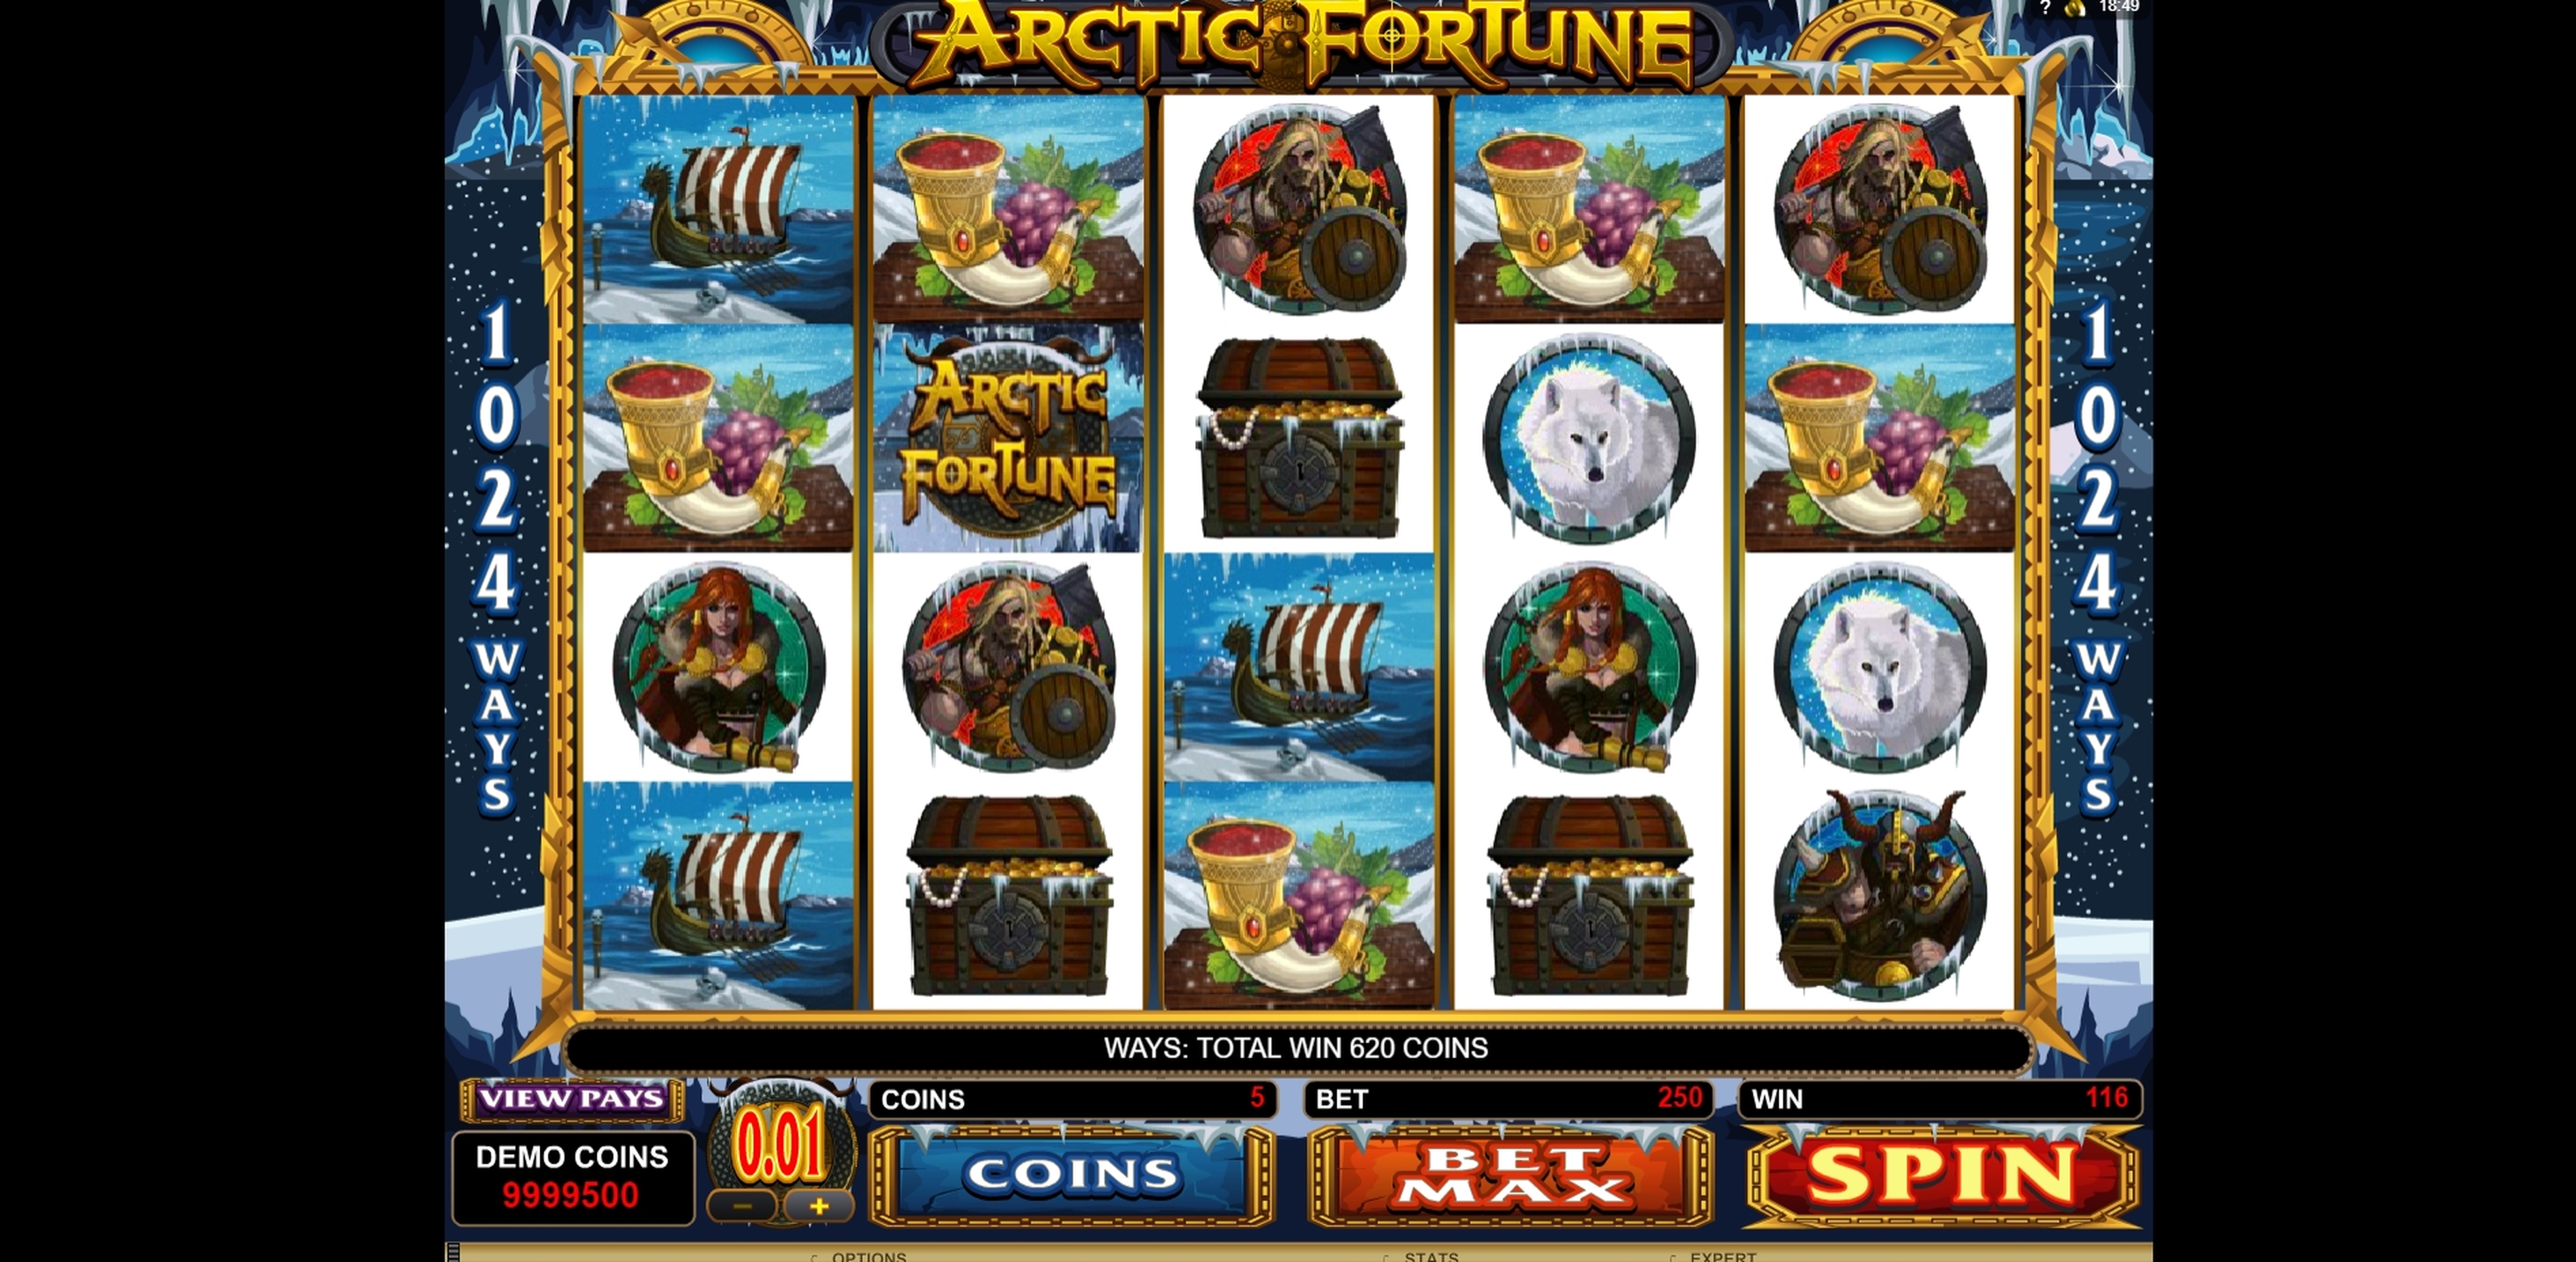 Win Money in Arctic Fortune Free Slot Game by Microgaming